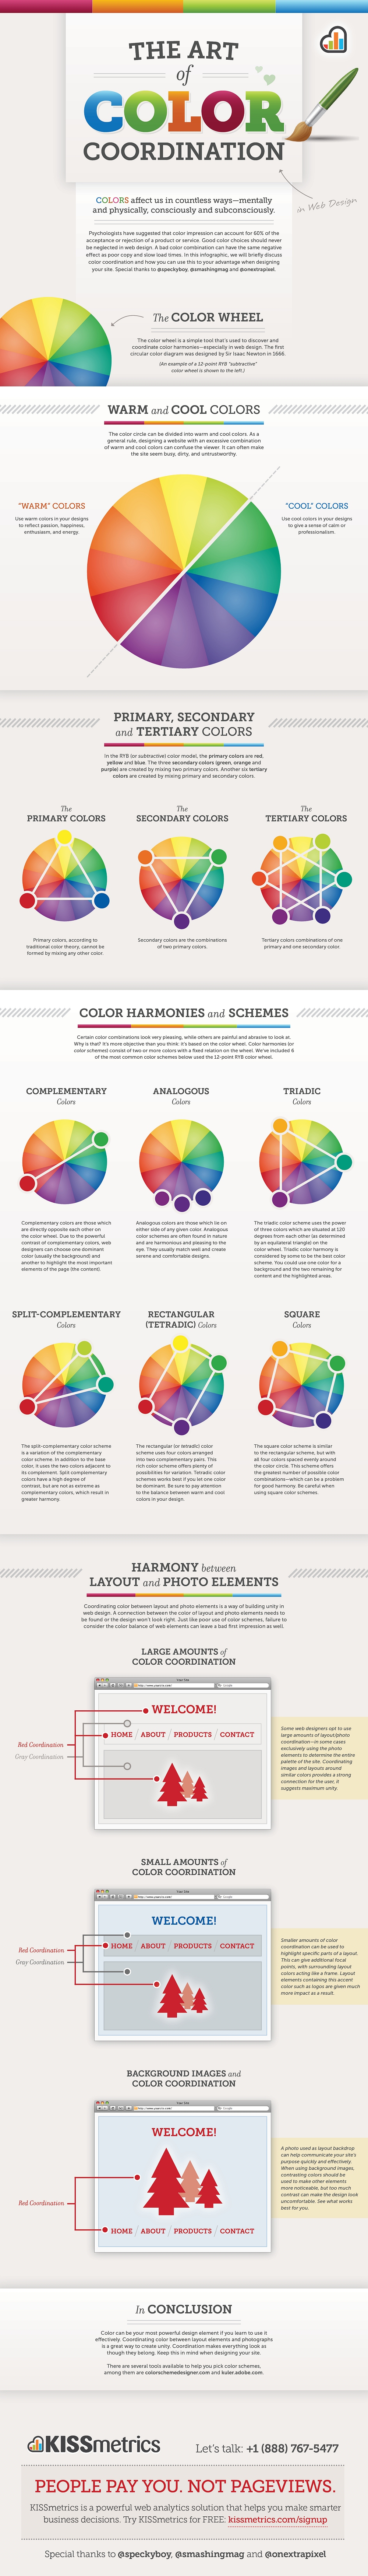 The Art of Color Coordination infographic